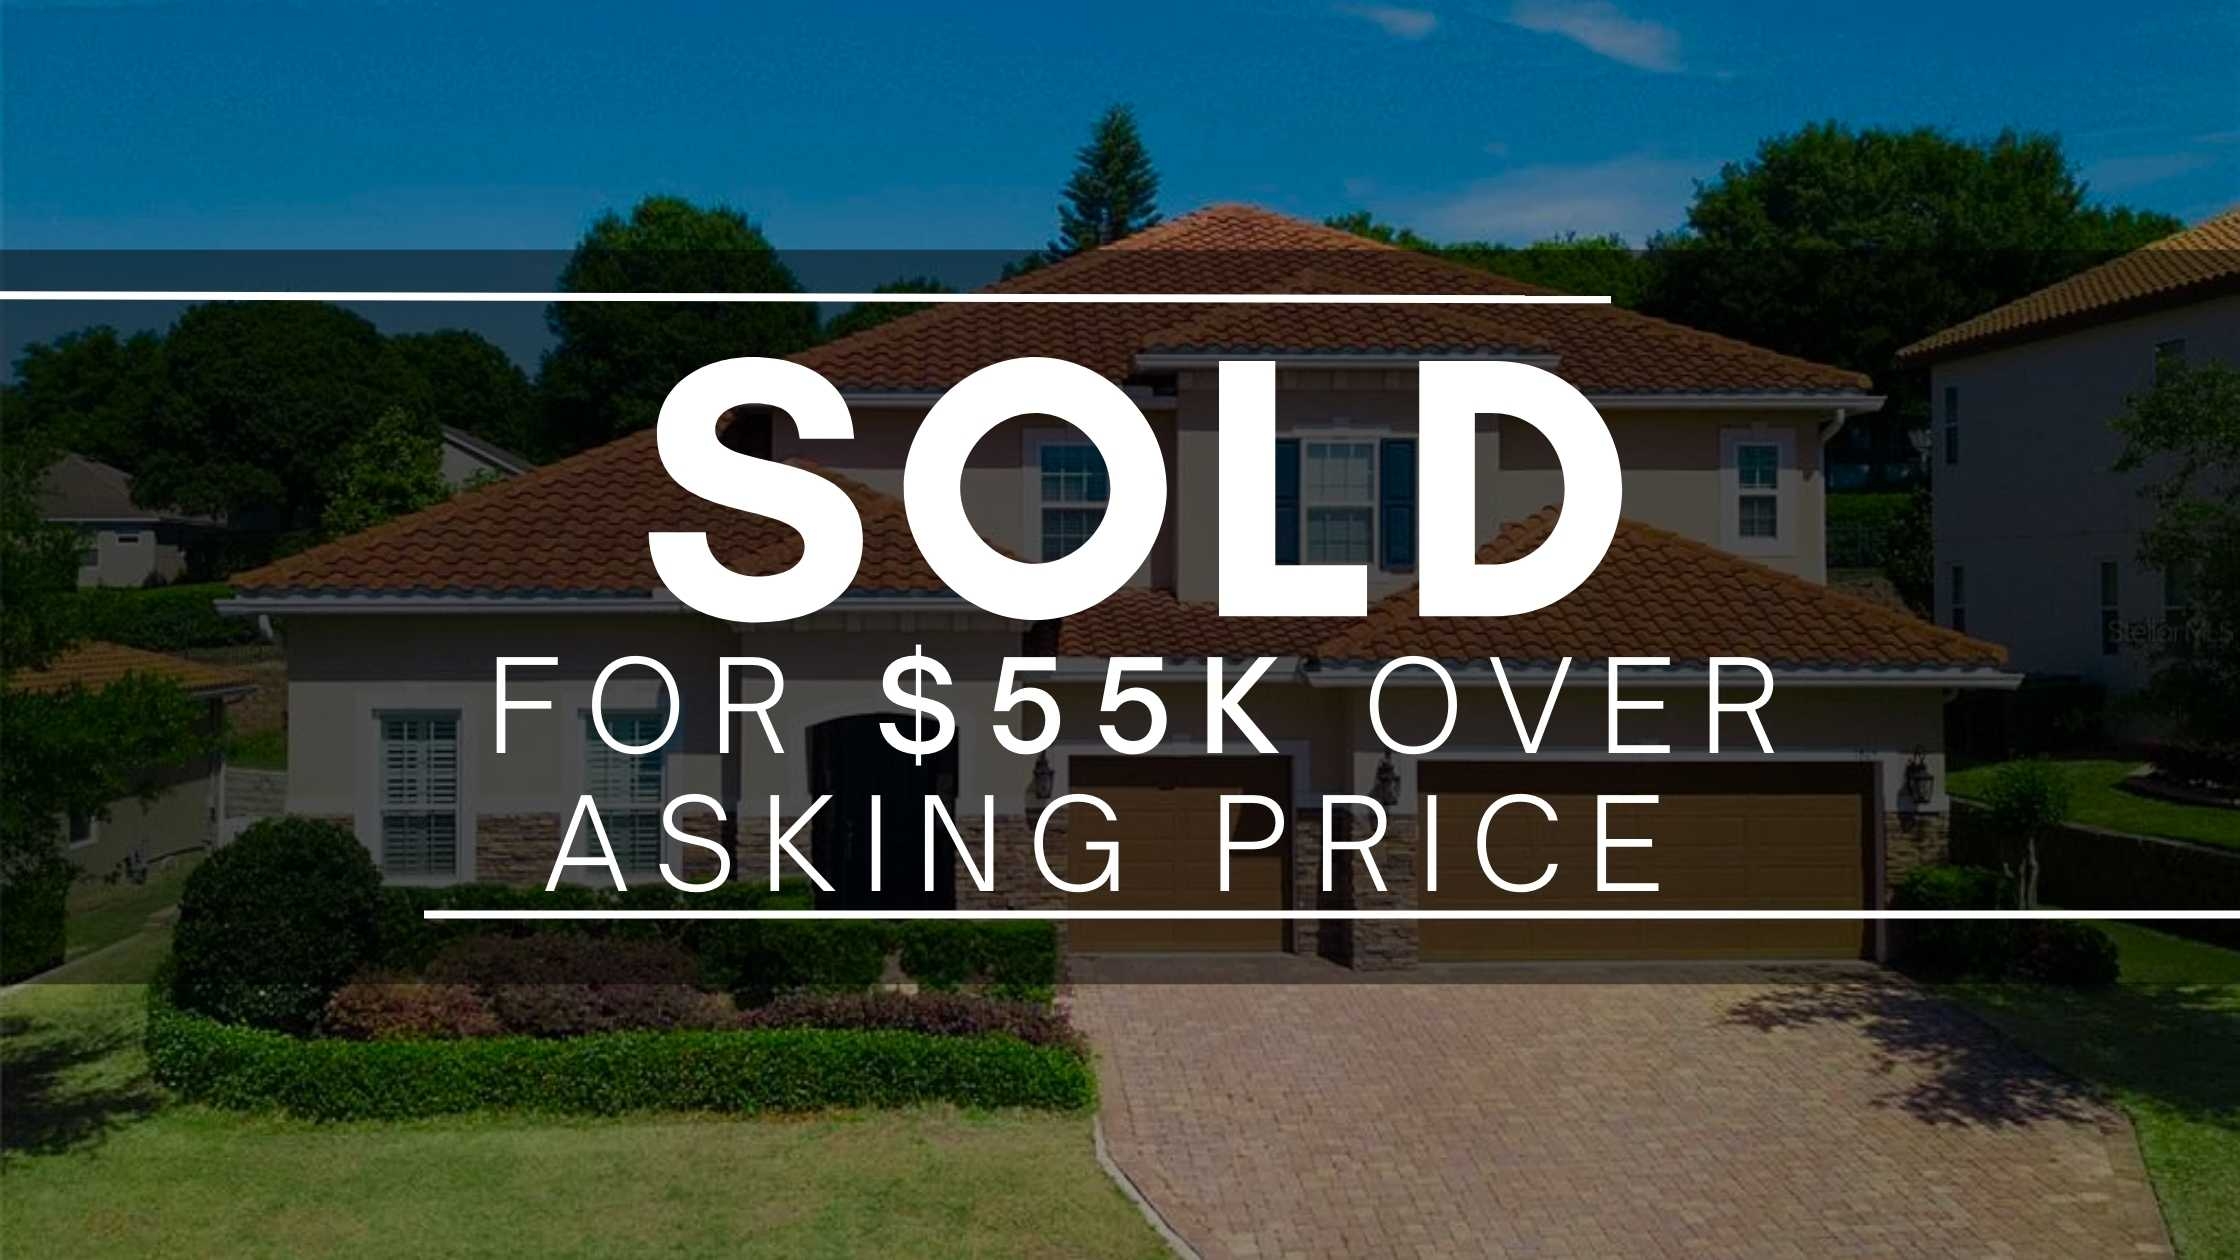 Orlando House Sold For $55k Over the Asking Price in Just 4 Days!